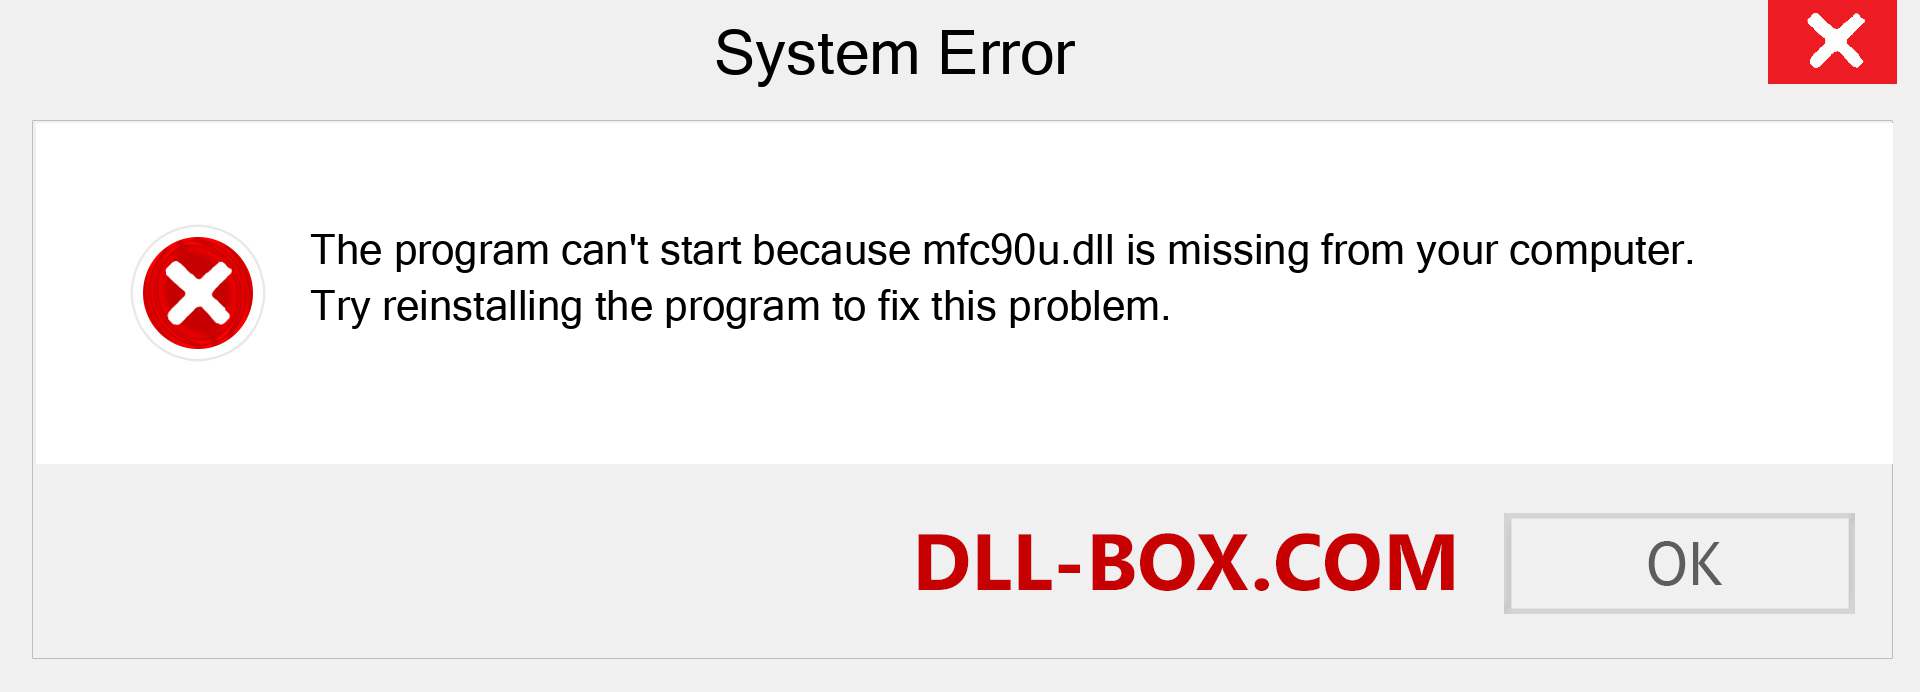  mfc90u.dll file is missing?. Download for Windows 7, 8, 10 - Fix  mfc90u dll Missing Error on Windows, photos, images